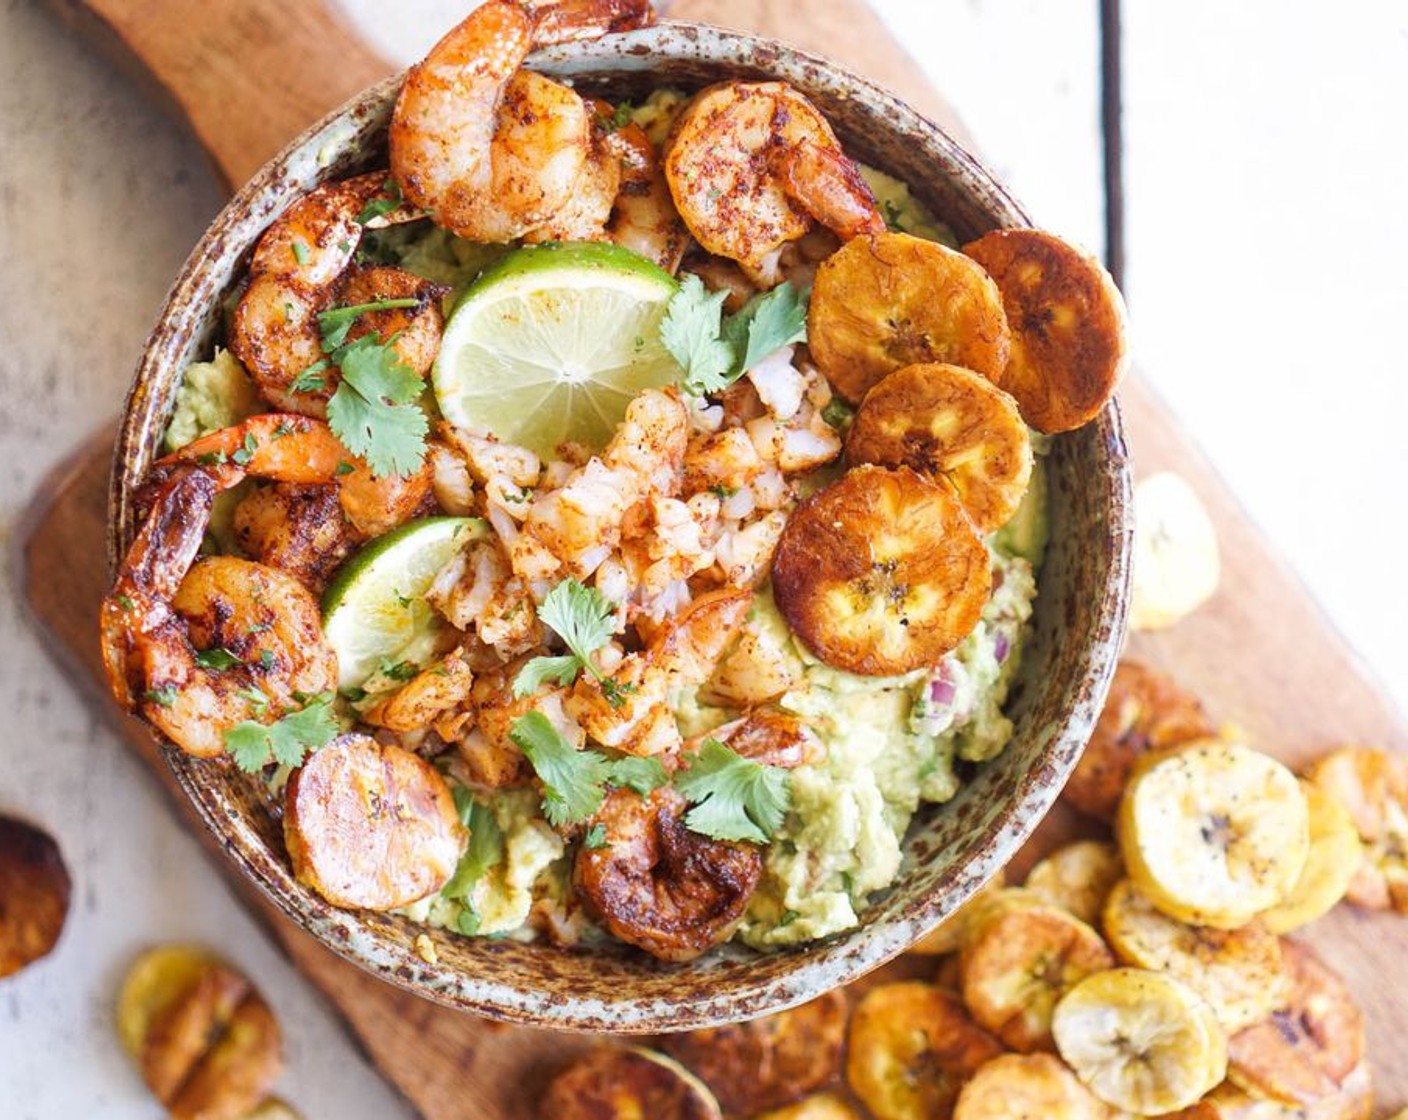 Loaded Guacamole with Chili Shrimp and Roasted Plantains